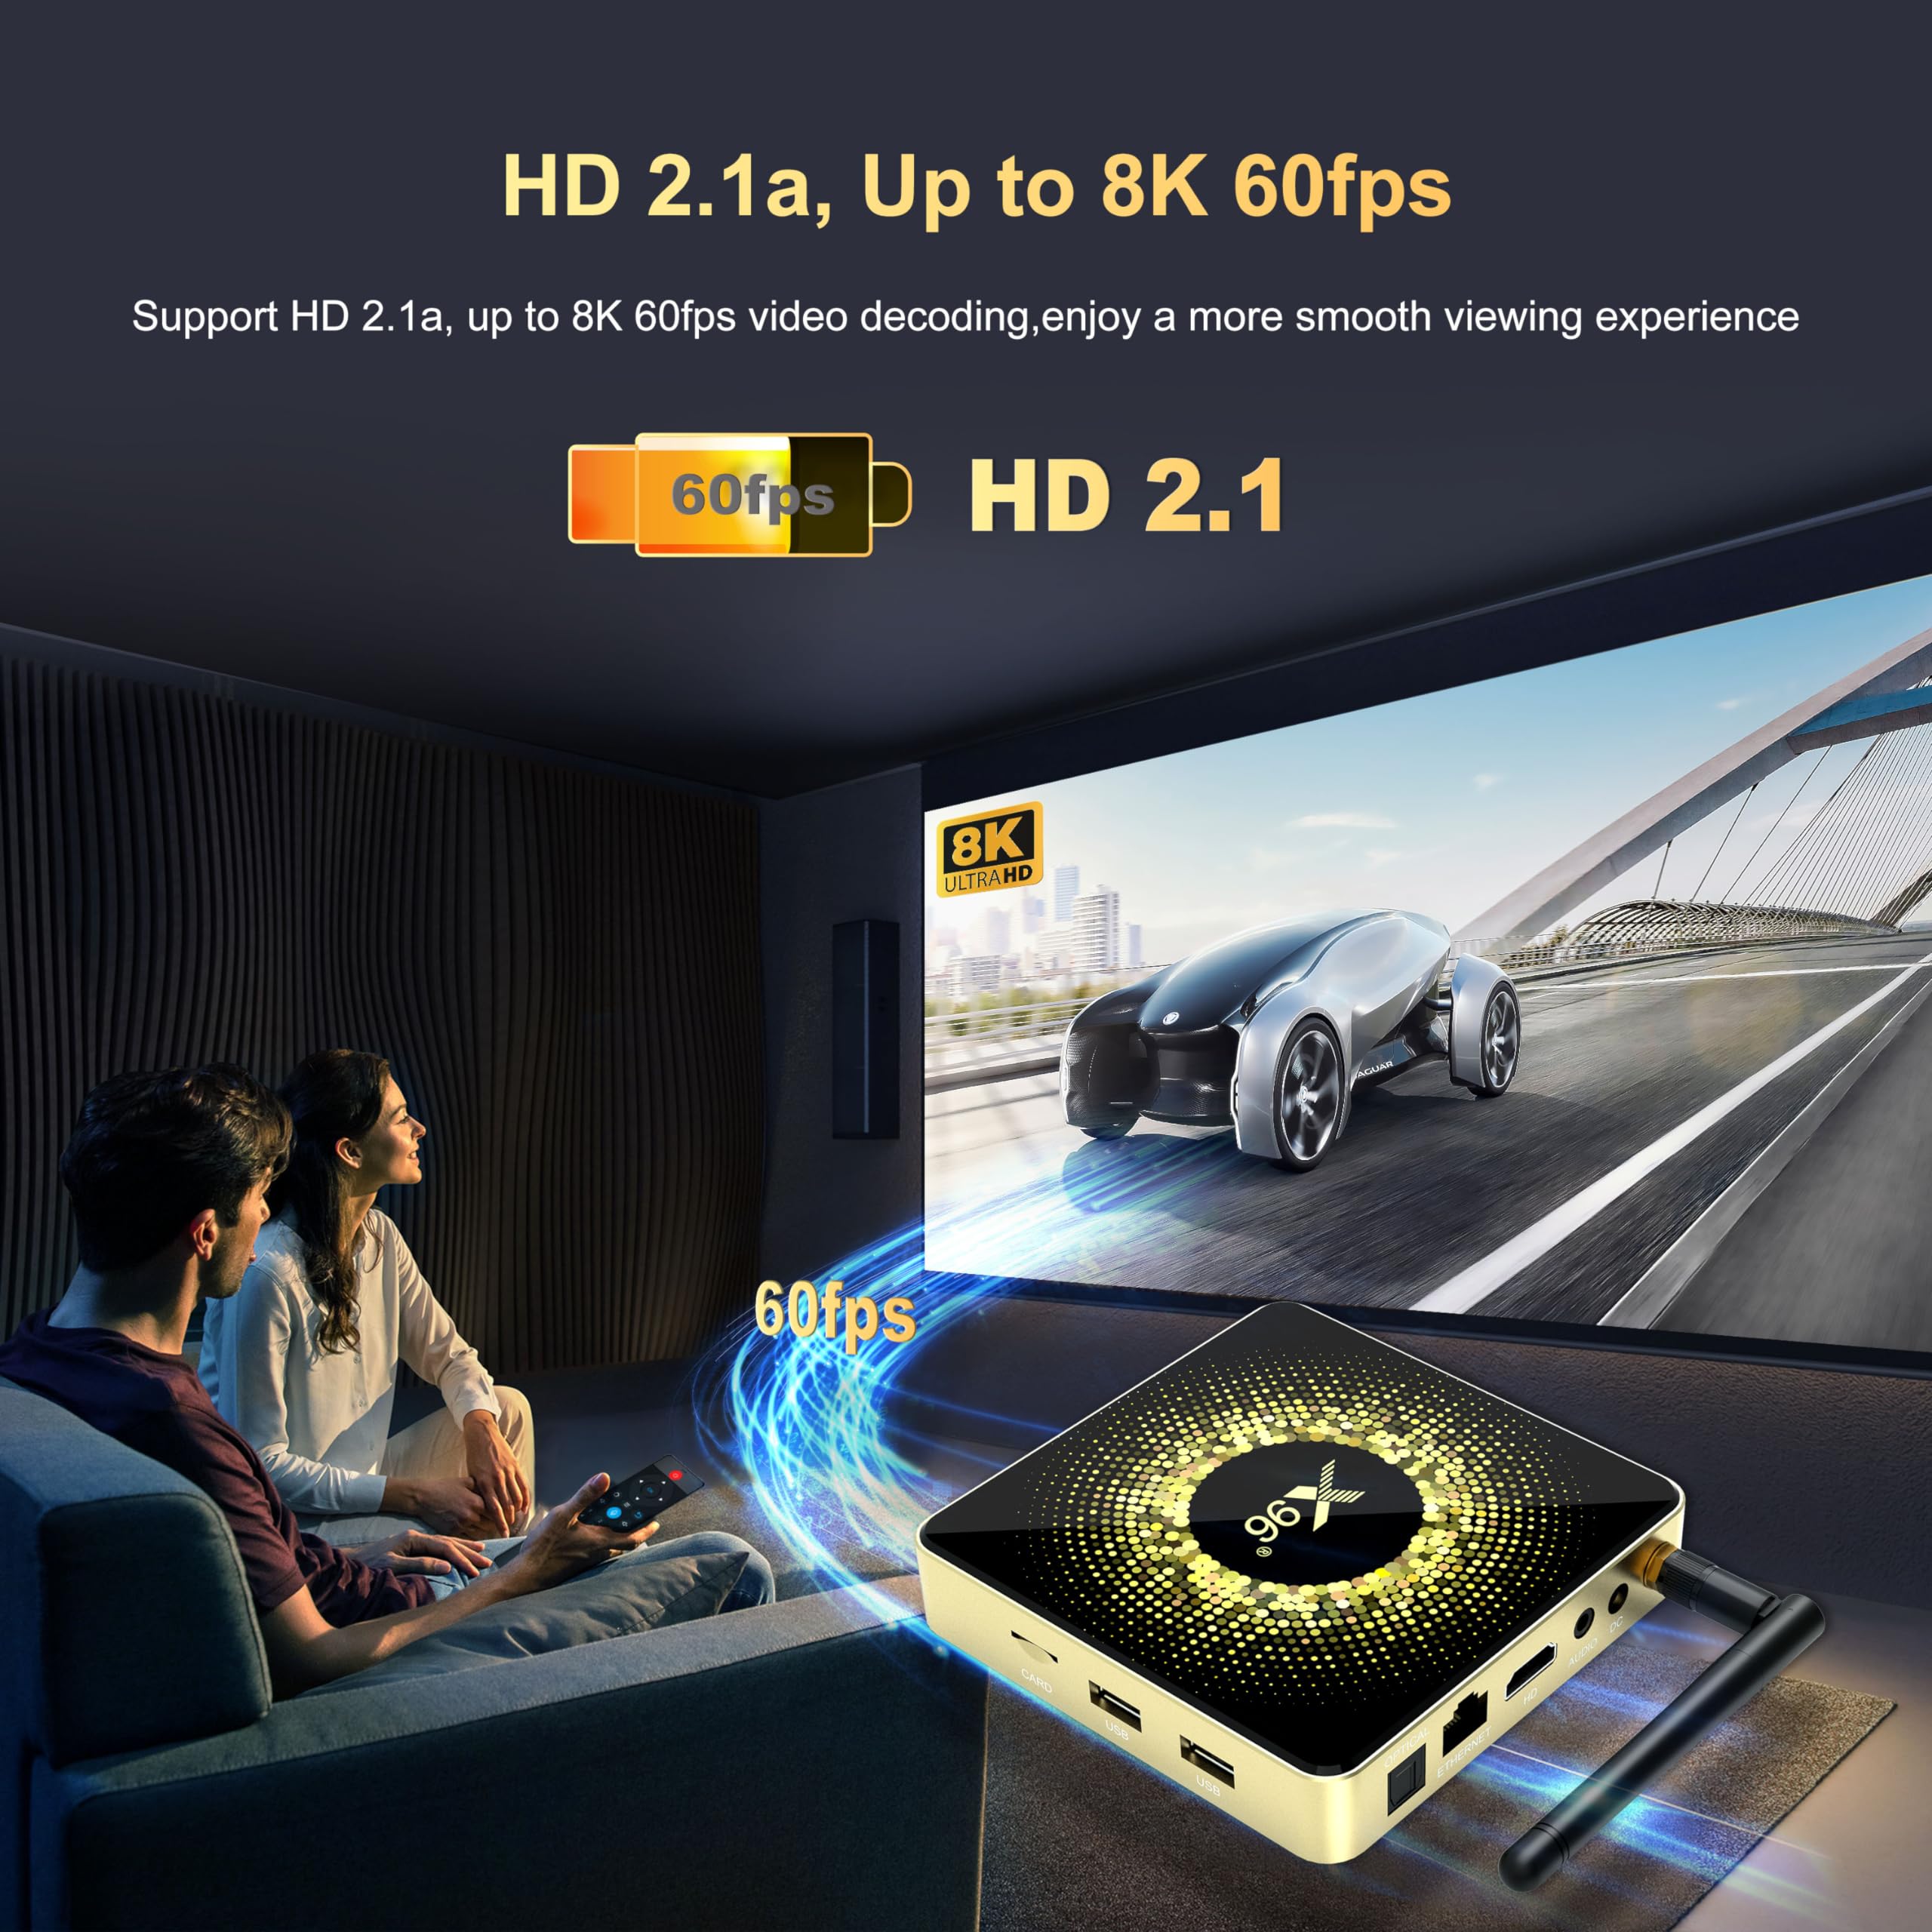 X96 X10 8K Ultra HD Android TV Box Android 11.0 Amlogic S928X LPDDR4 8GB RAM 64GB ROM WiFi6 1000M BT5.2 USB3.0 Support AV1 8K 60fps H.265 HDR Set Top tv Box with i8 Keyboard